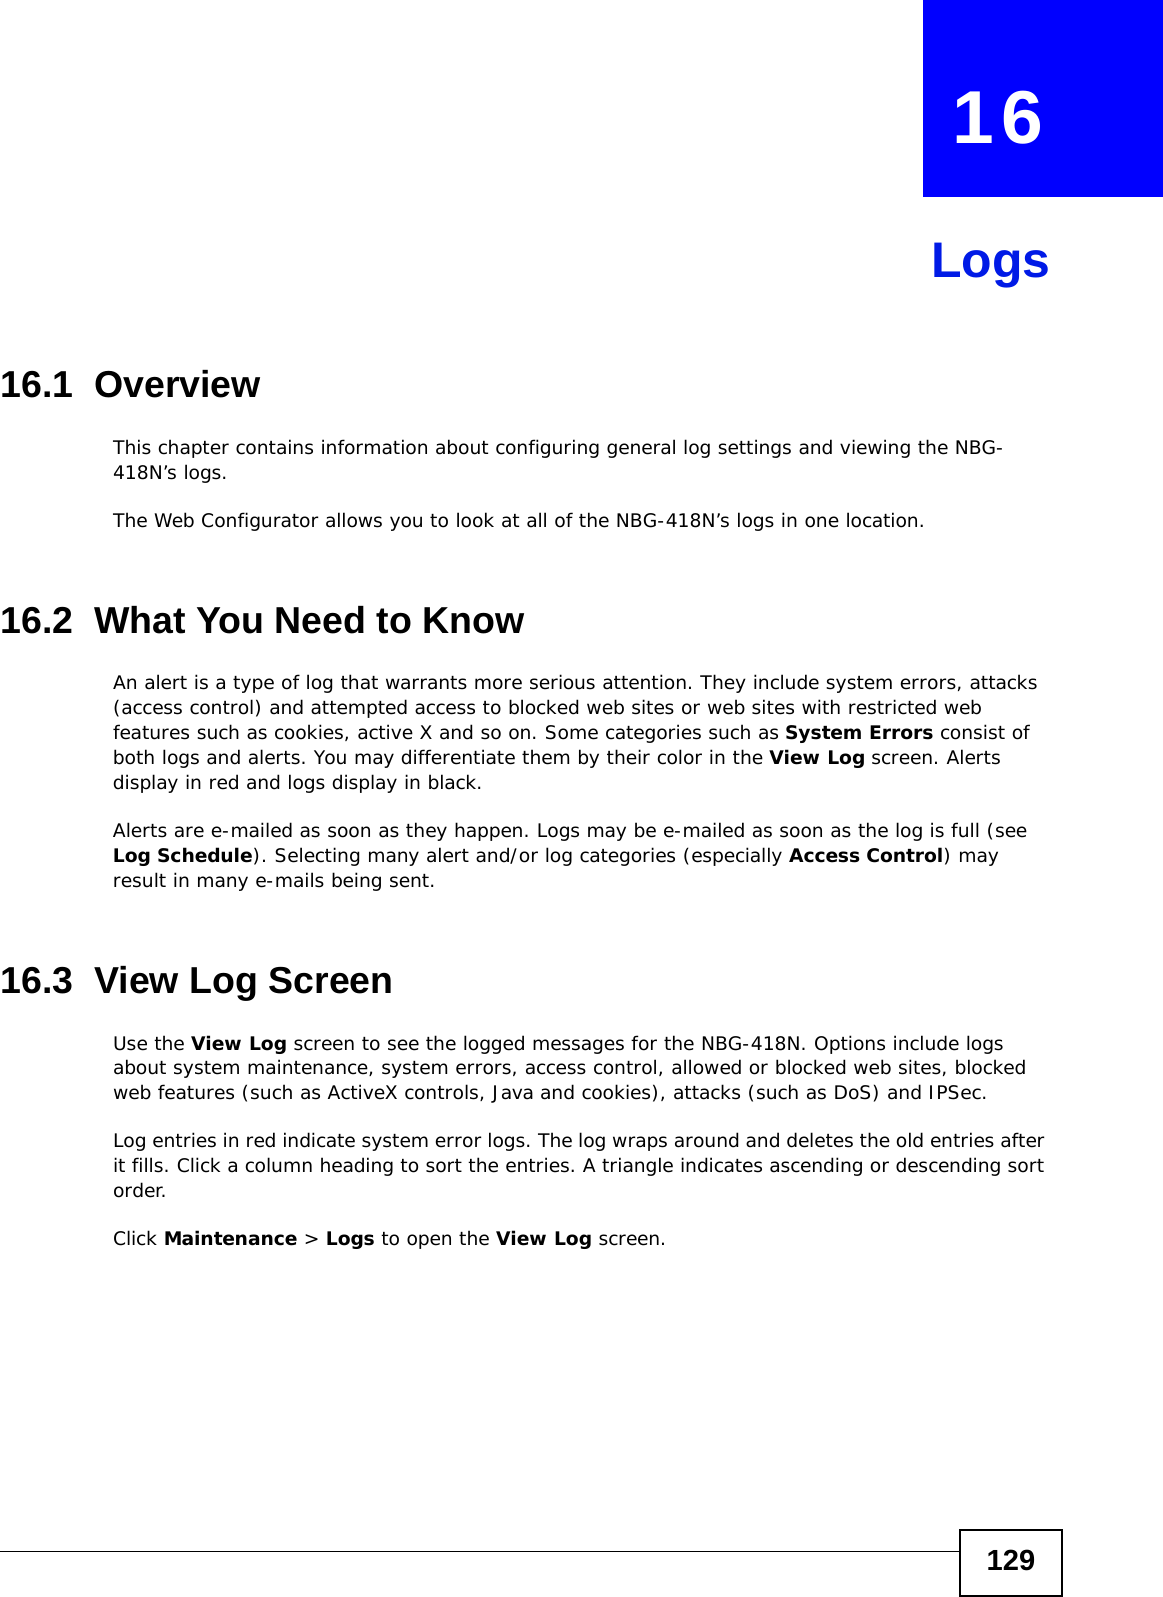 129CHAPTER   16Logs16.1  OverviewThis chapter contains information about configuring general log settings and viewing the NBG-418N’s logs. The Web Configurator allows you to look at all of the NBG-418N’s logs in one location. 16.2  What You Need to KnowAn alert is a type of log that warrants more serious attention. They include system errors, attacks (access control) and attempted access to blocked web sites or web sites with restricted web features such as cookies, active X and so on. Some categories such as System Errors consist of both logs and alerts. You may differentiate them by their color in the View Log screen. Alerts display in red and logs display in black.Alerts are e-mailed as soon as they happen. Logs may be e-mailed as soon as the log is full (see Log Schedule). Selecting many alert and/or log categories (especially Access Control) may result in many e-mails being sent.16.3  View Log ScreenUse the View Log screen to see the logged messages for the NBG-418N. Options include logs about system maintenance, system errors, access control, allowed or blocked web sites, blocked web features (such as ActiveX controls, Java and cookies), attacks (such as DoS) and IPSec.Log entries in red indicate system error logs. The log wraps around and deletes the old entries after it fills. Click a column heading to sort the entries. A triangle indicates ascending or descending sort order. Click Maintenance &gt; Logs to open the View Log screen.